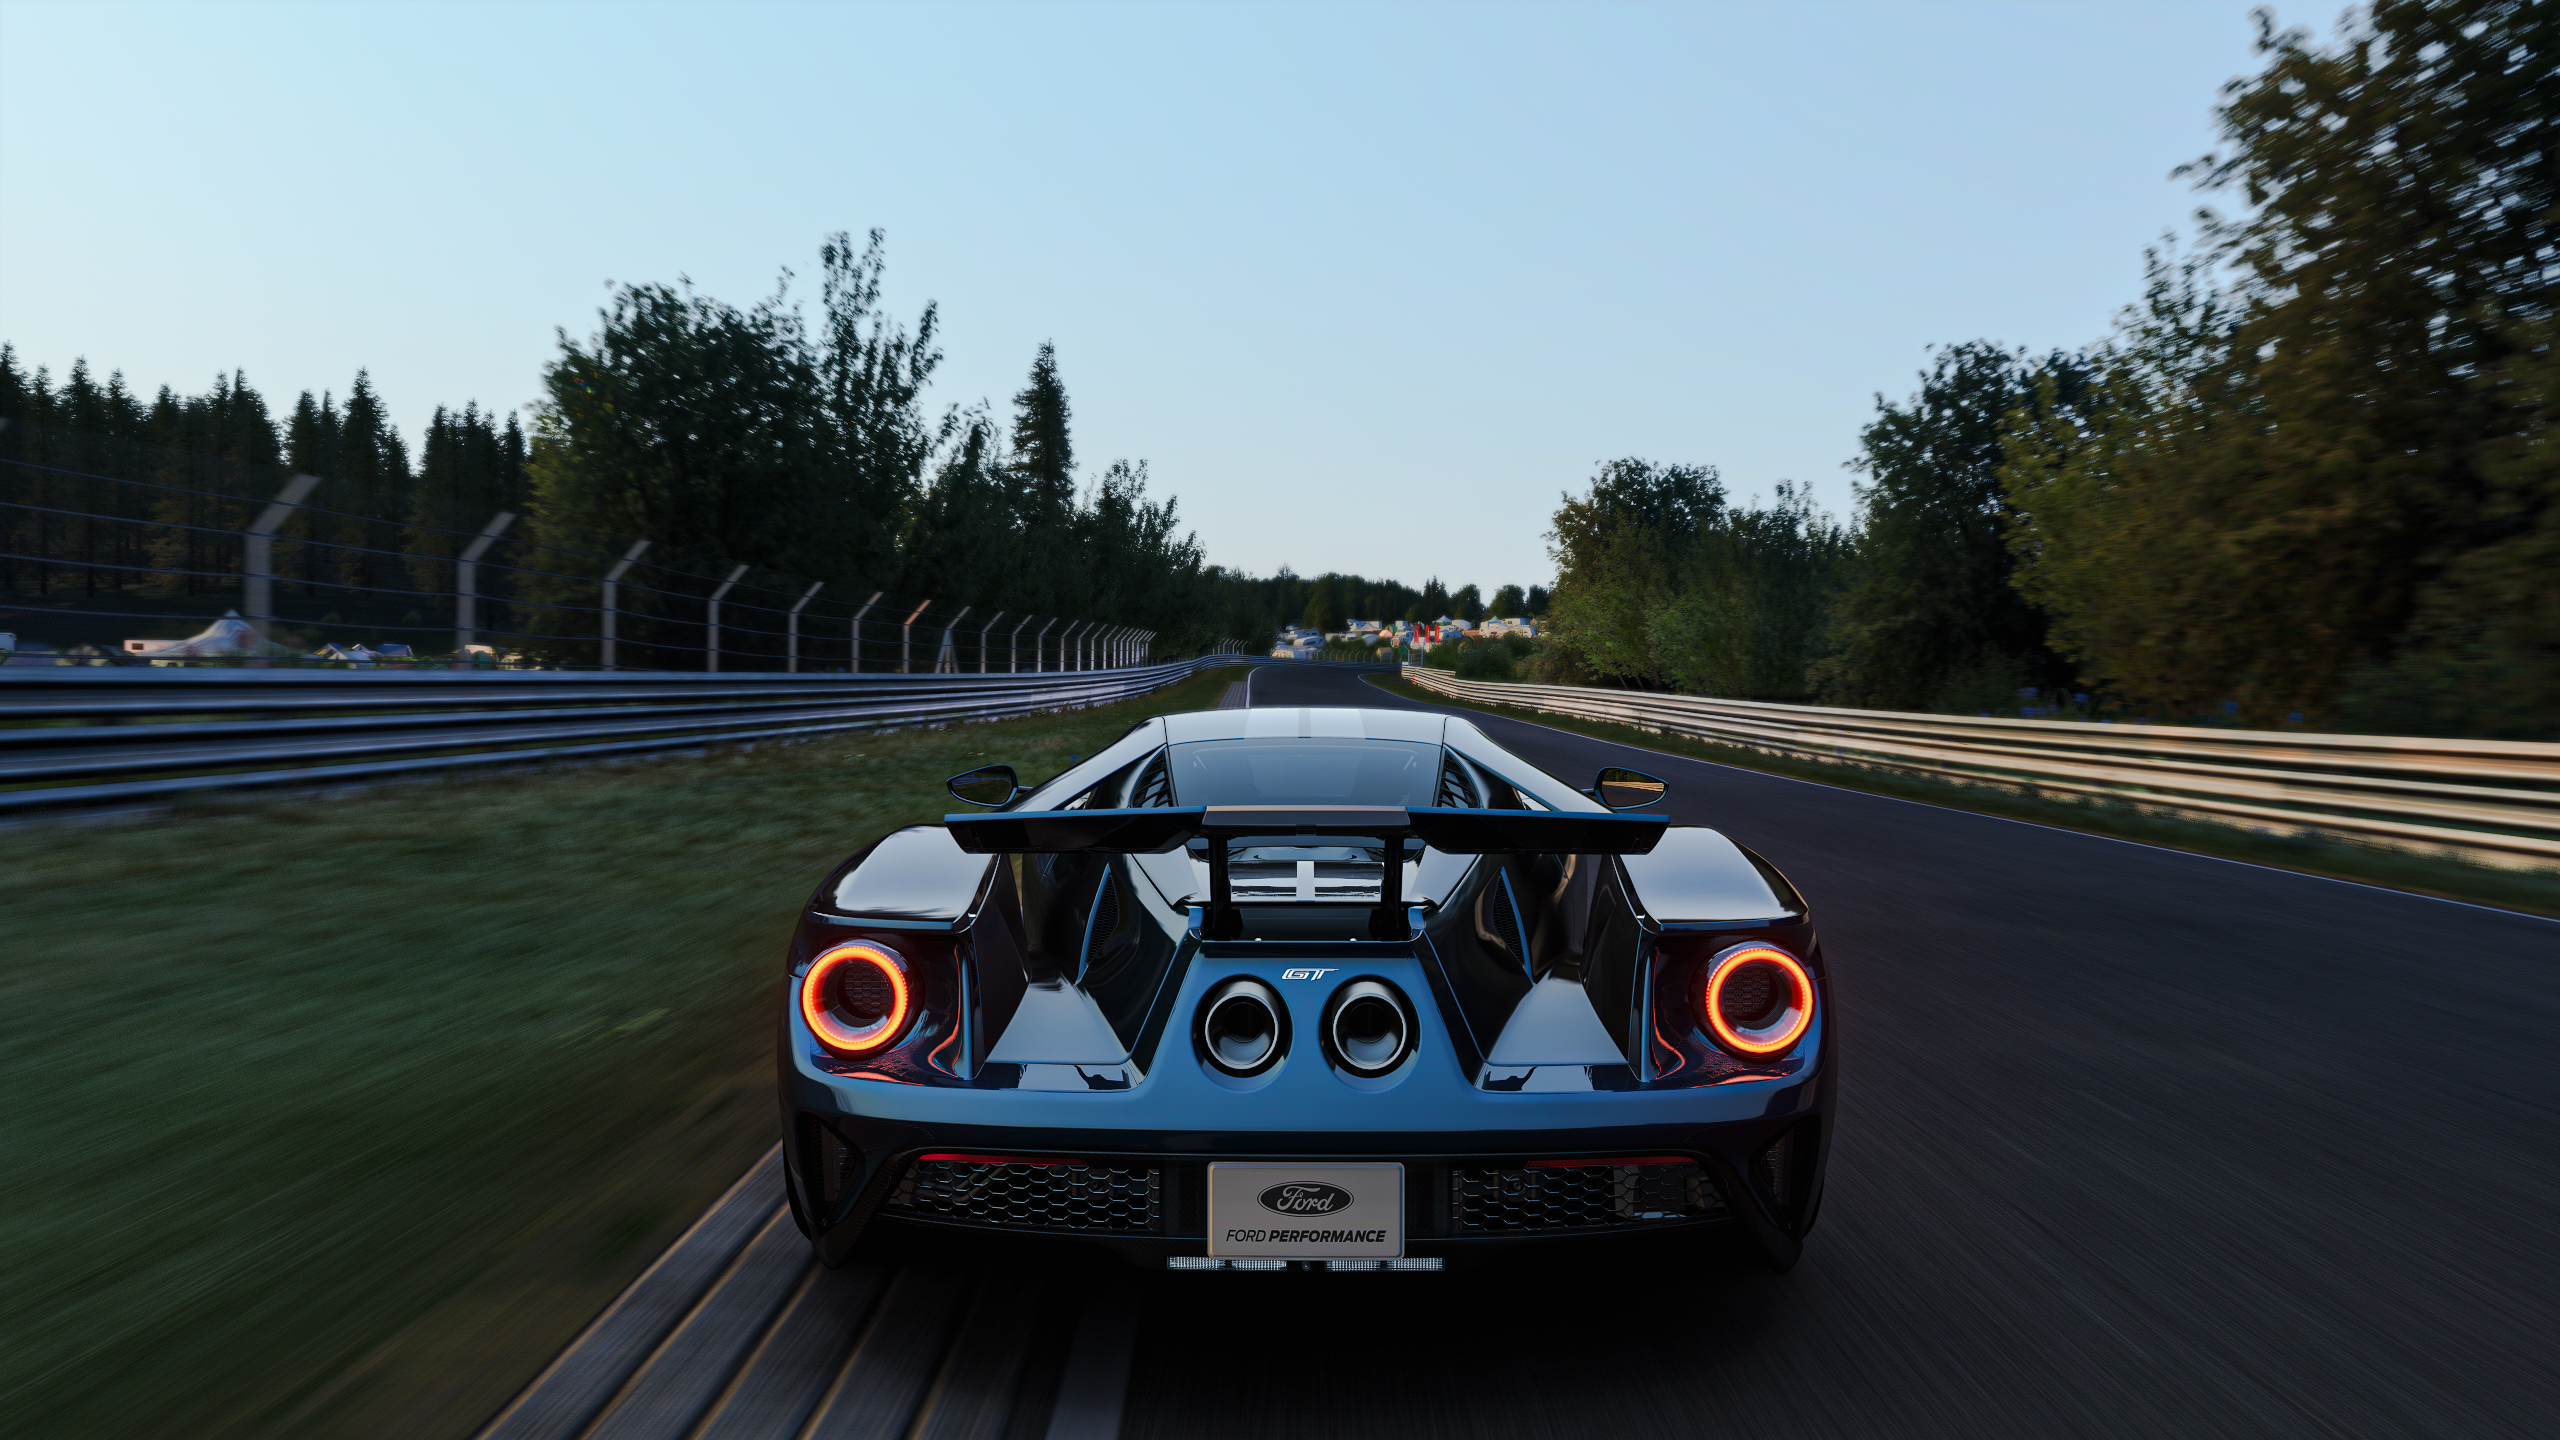 Car Vehicle Assetto Corsa Ford Ford GT Ford GT Mk Ii Nurburgring Simulation Rear View Race Tracks Li 2560x1440